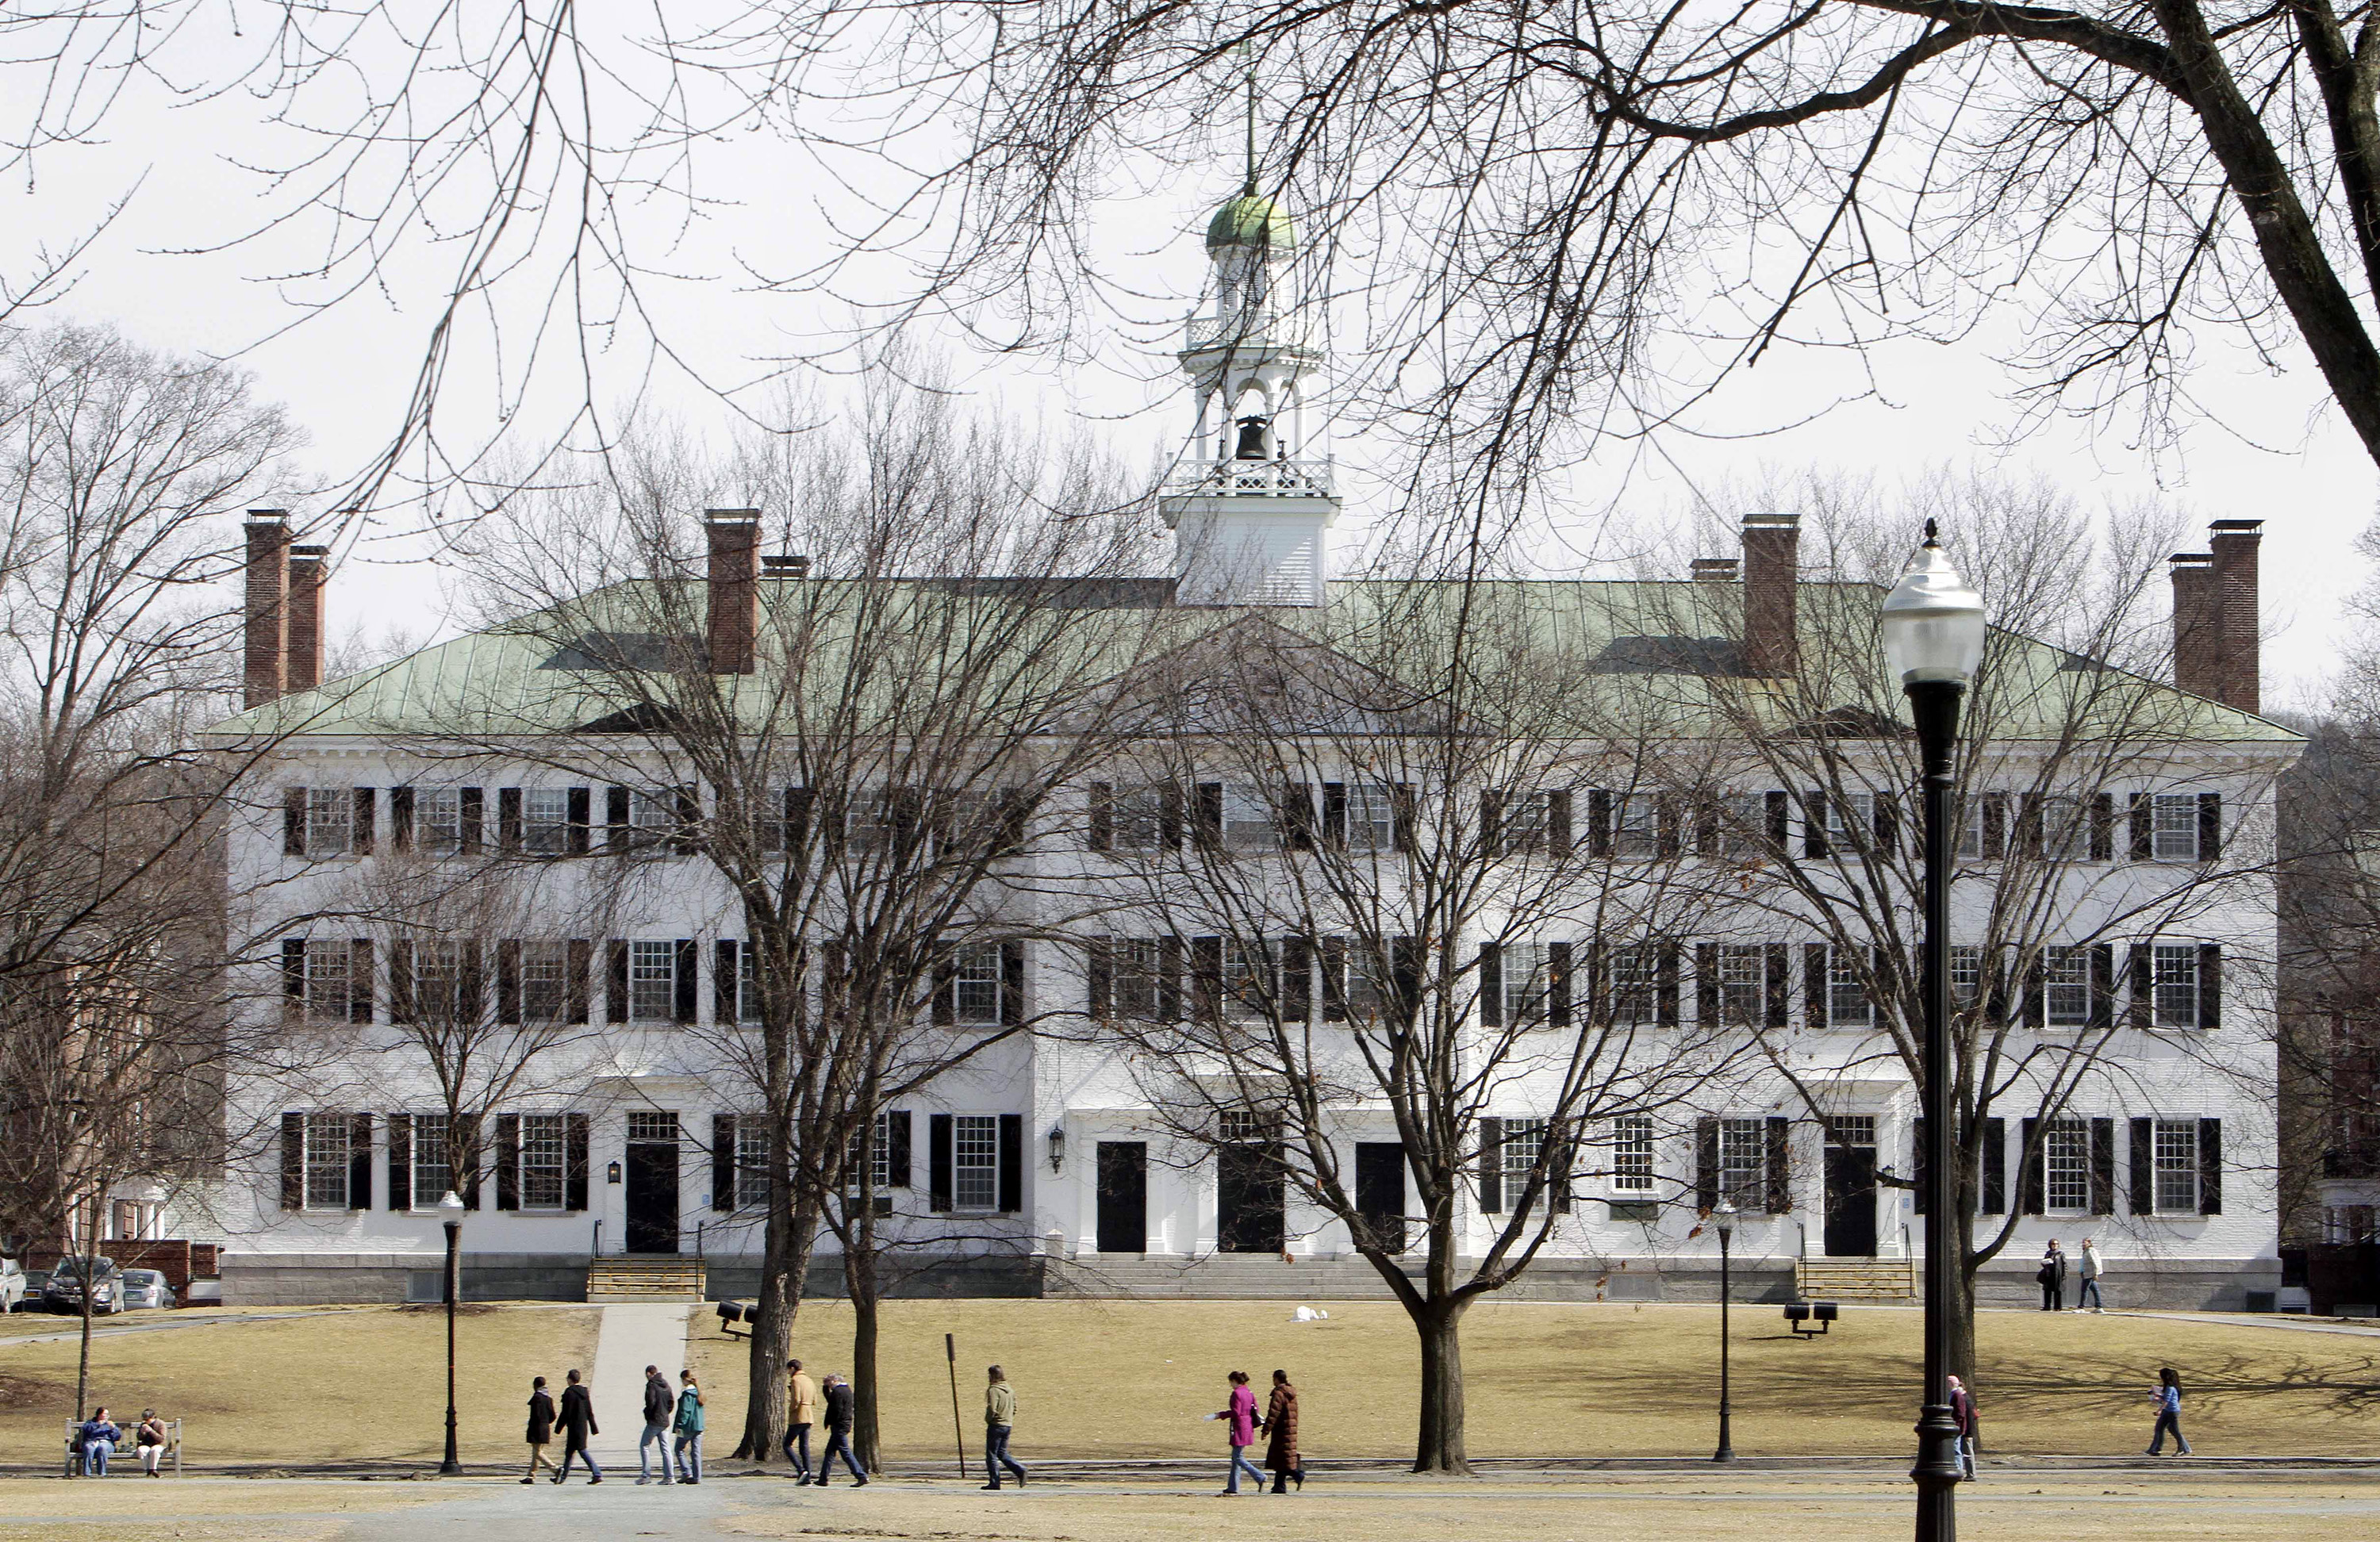 Students walk across the Dartmouth College campus green in Hanover, N.H., on March 12, 2012. The school is banning hard alcohol on campus. (Jim Cole—AP)